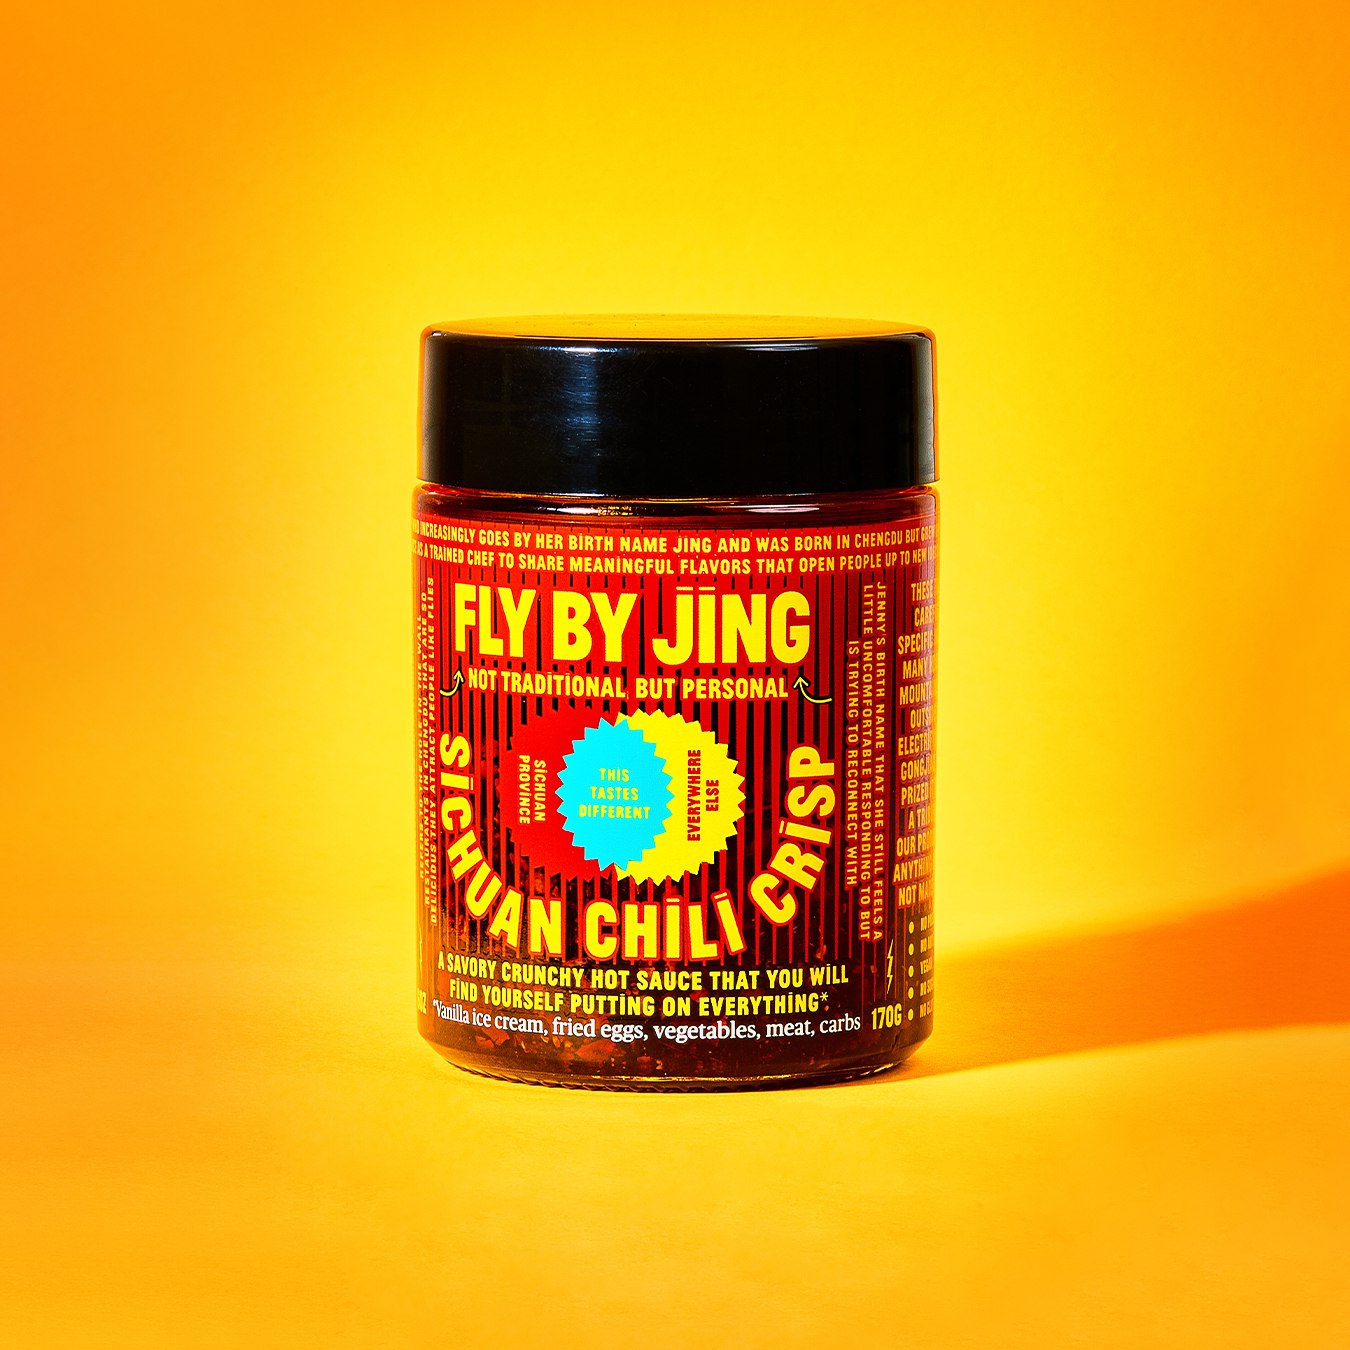 fly by jing sichuan chili crisp reviews